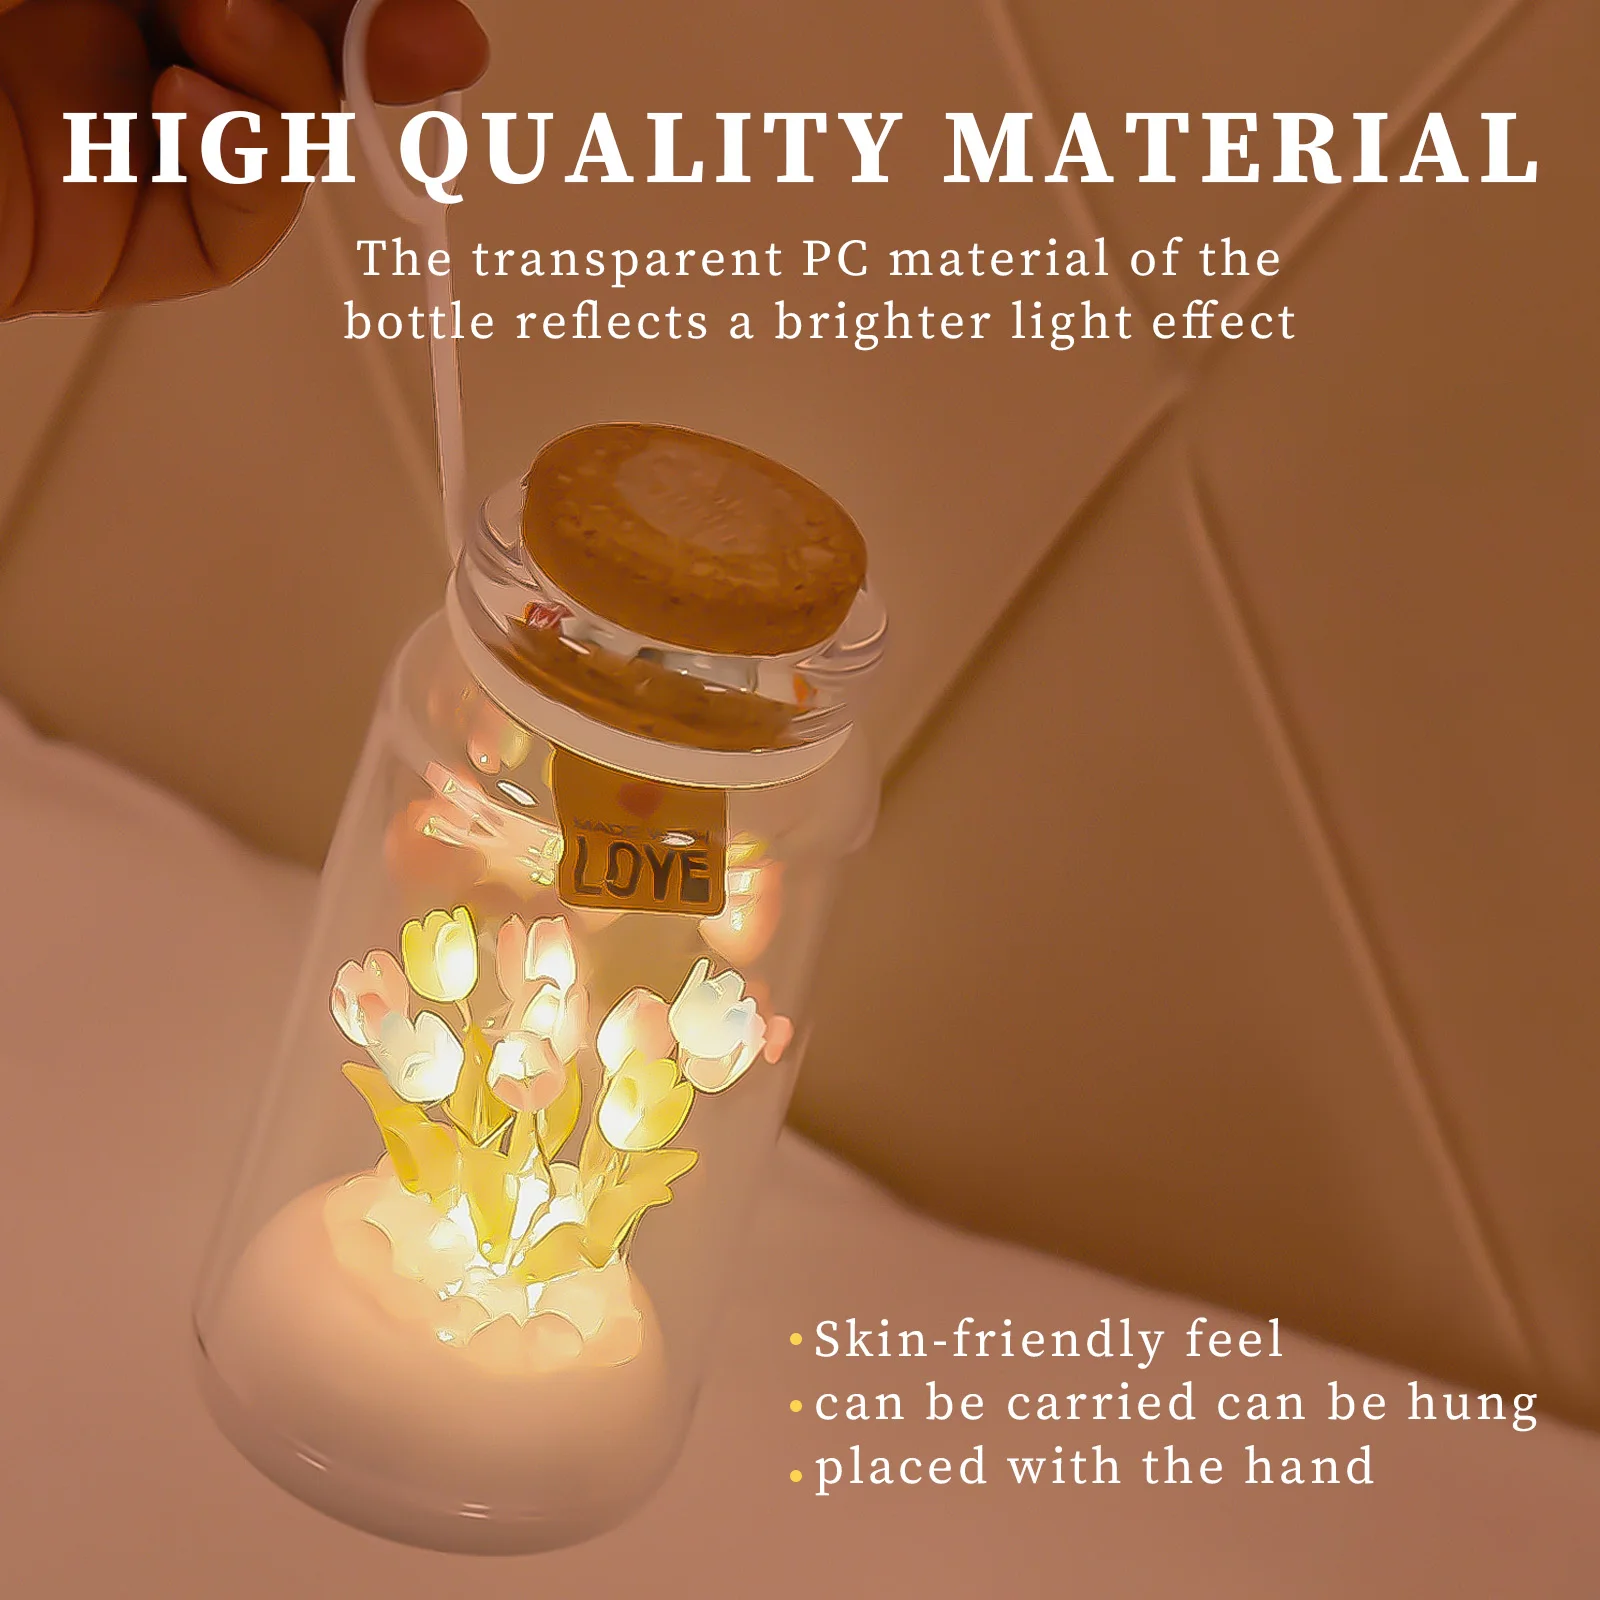 

USB Tulip Flower Lamp Pat Induction 5V 3W 500mAh LED Wish Bottle Light 3-gear Dimmable Ornaments Holiday Decor for Home Bedroom